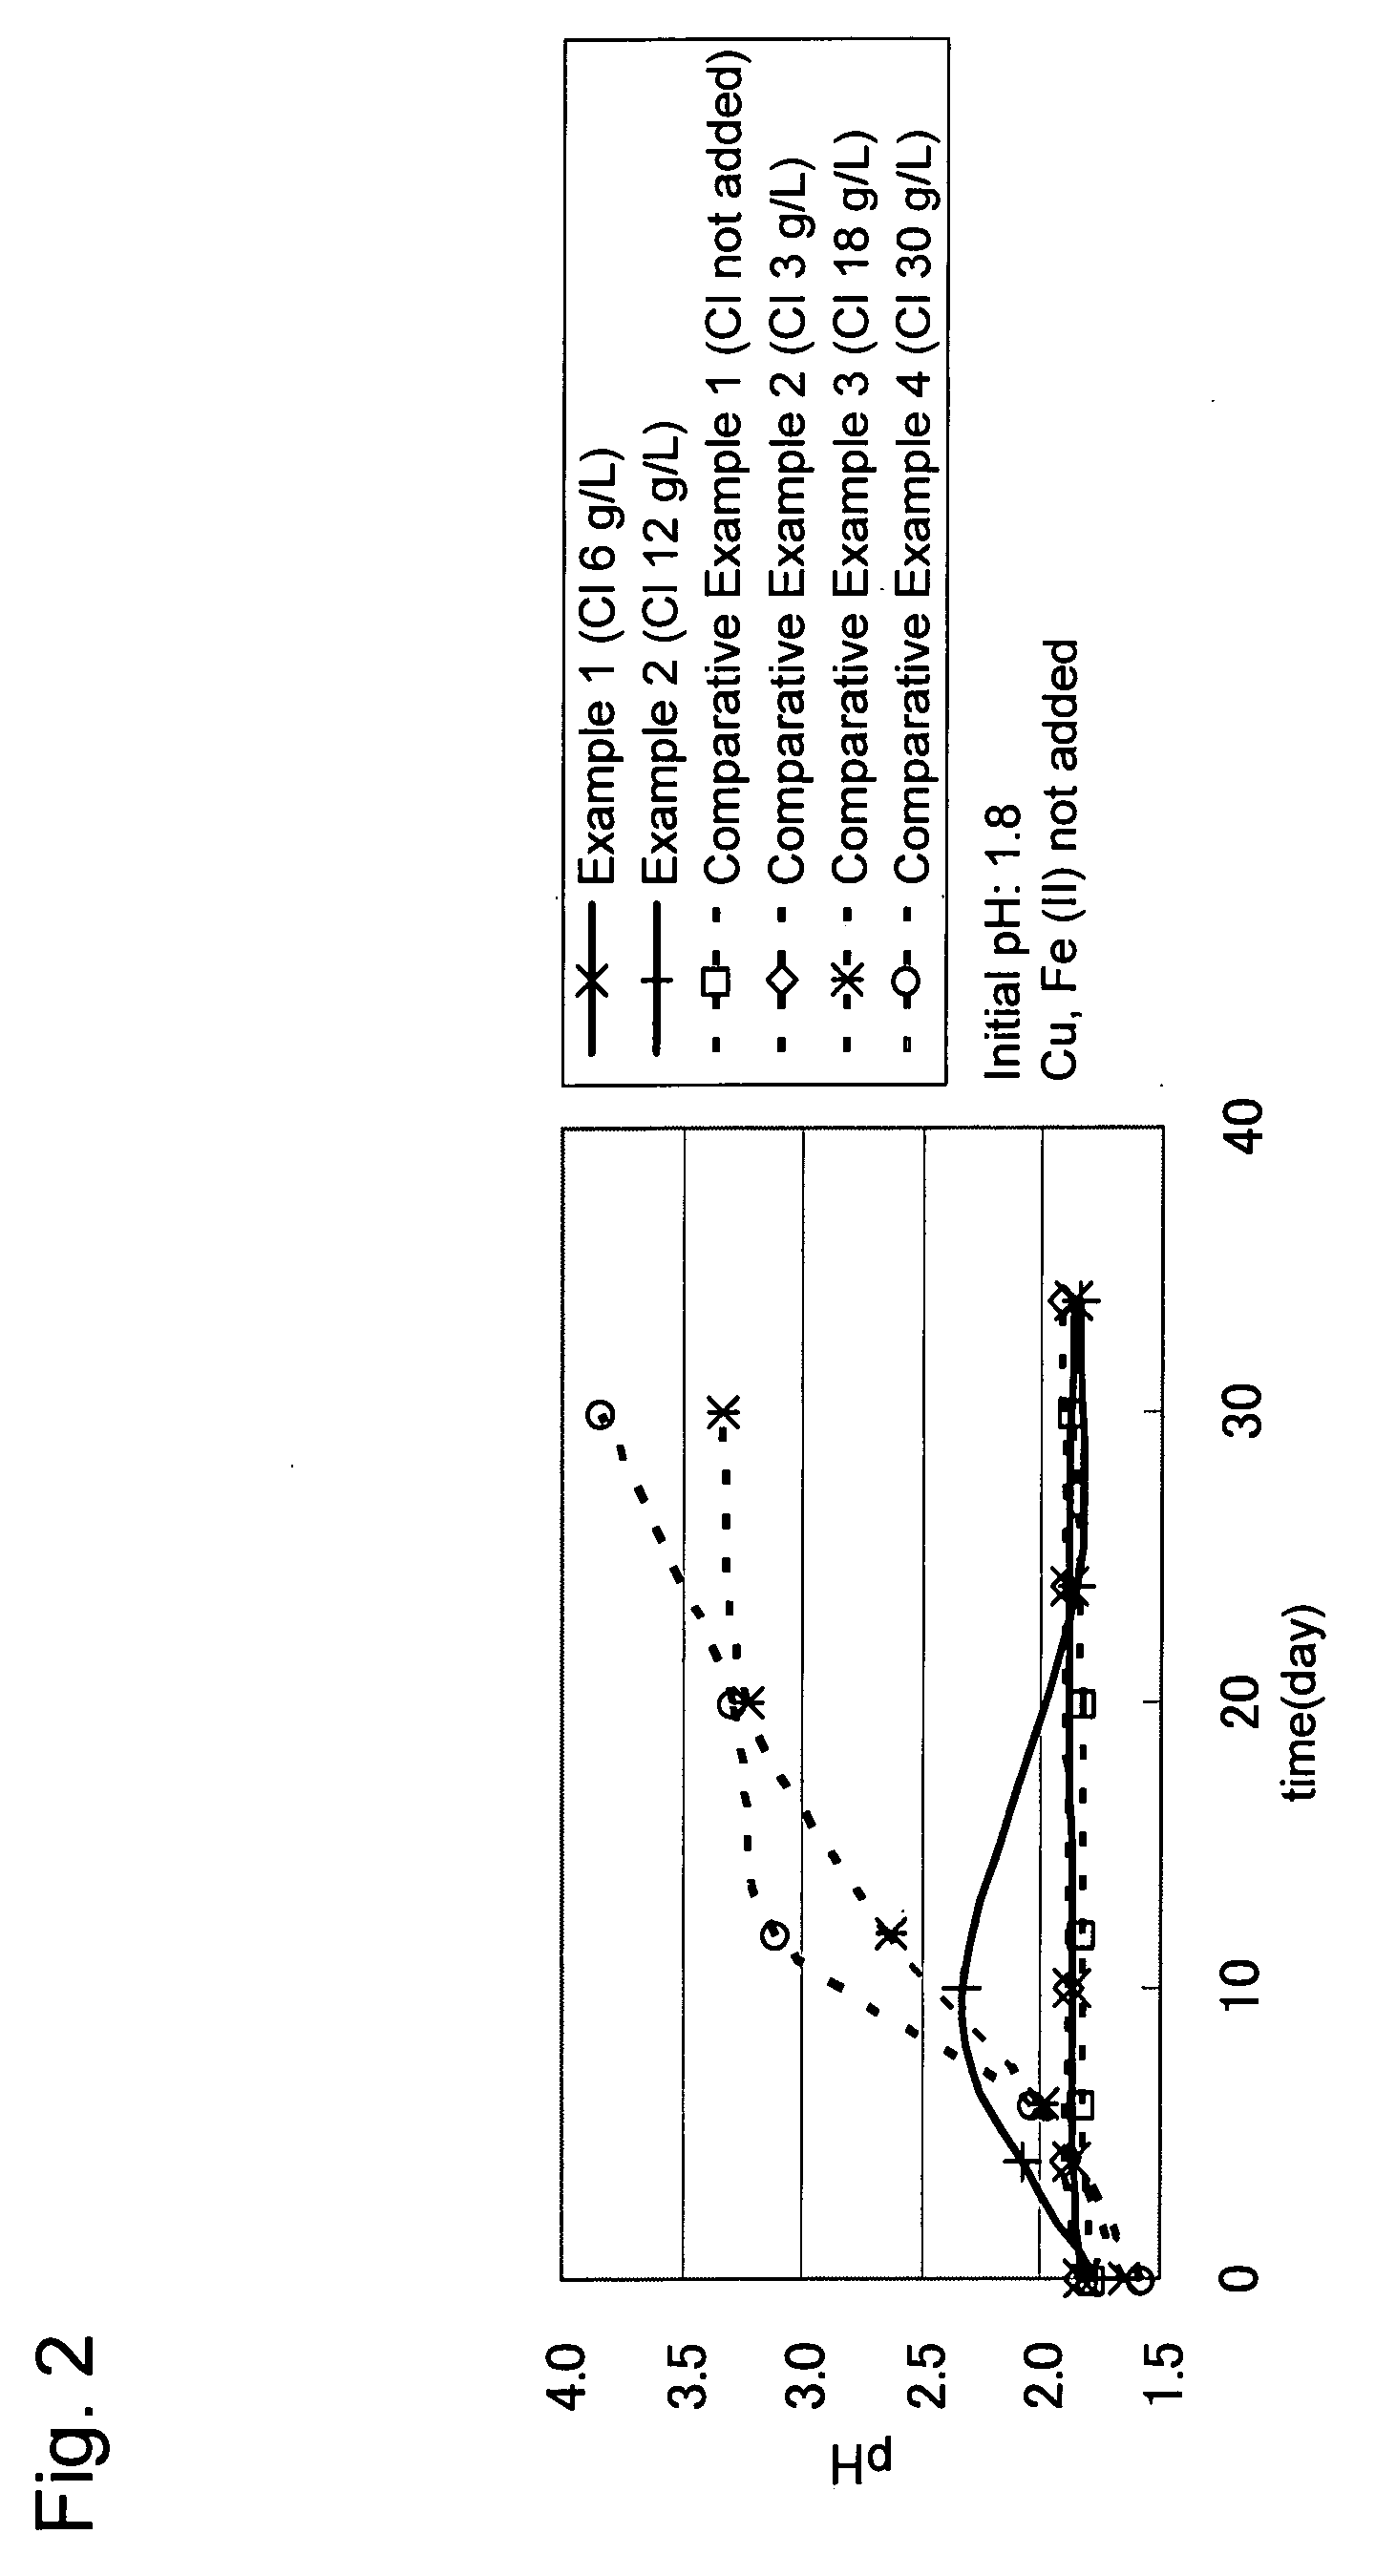 Method of leaching copper sulfide ores containing chalcopyrite